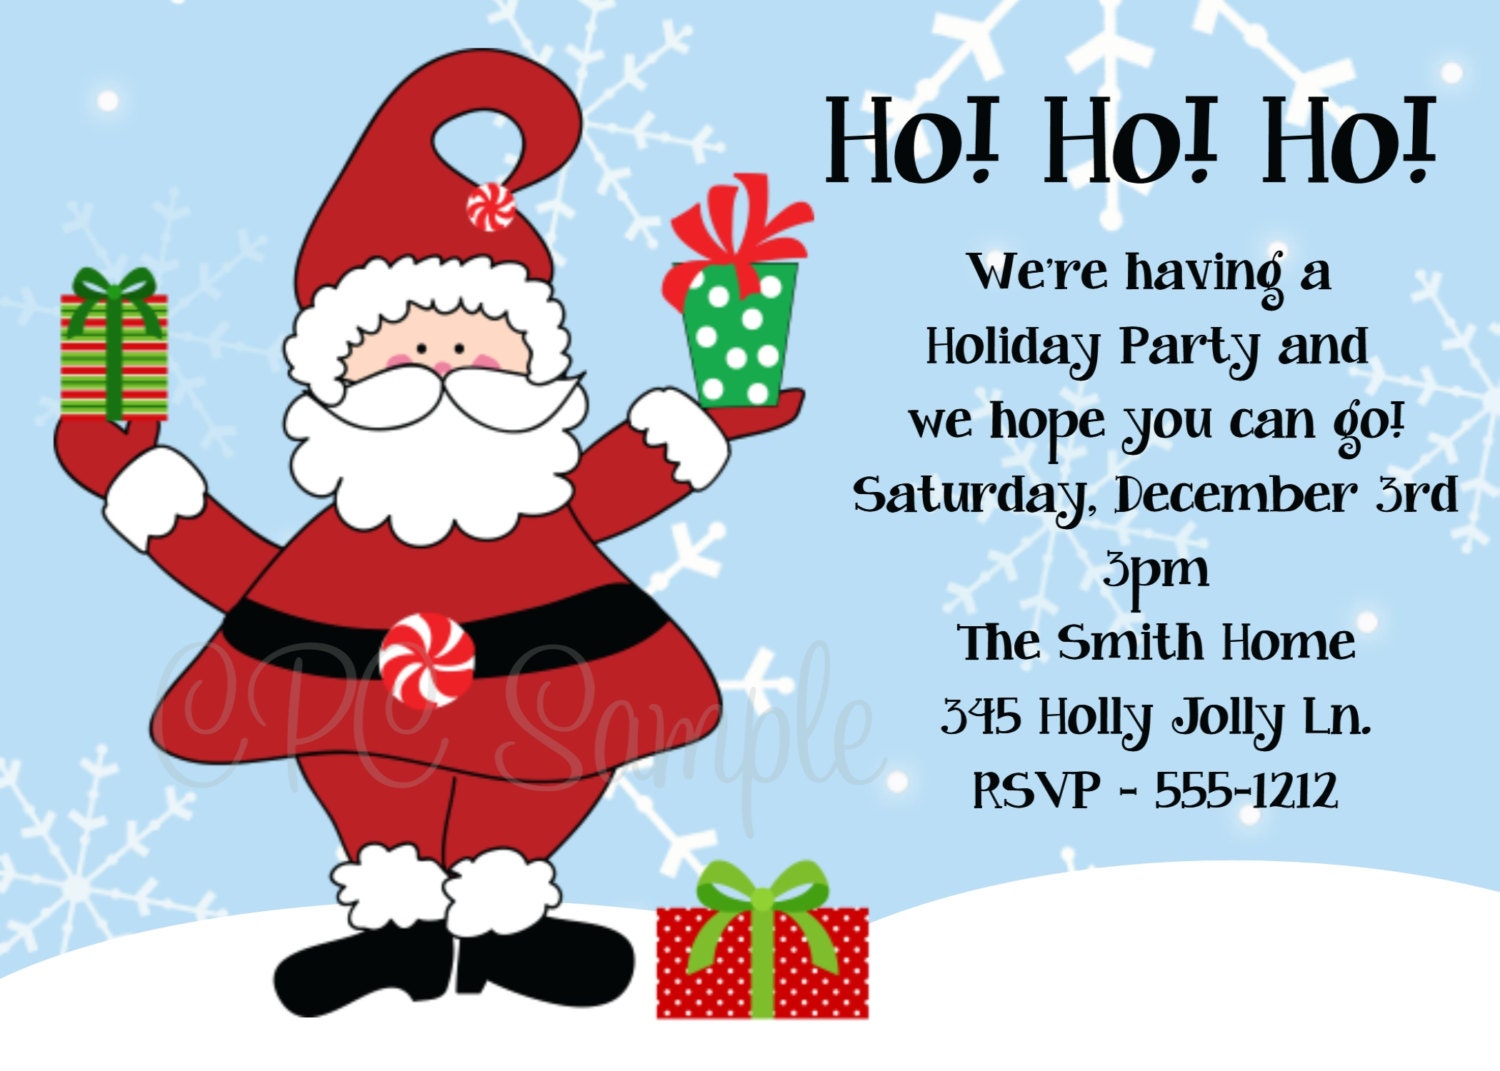 Corporate Christmas Party Invitations Wording